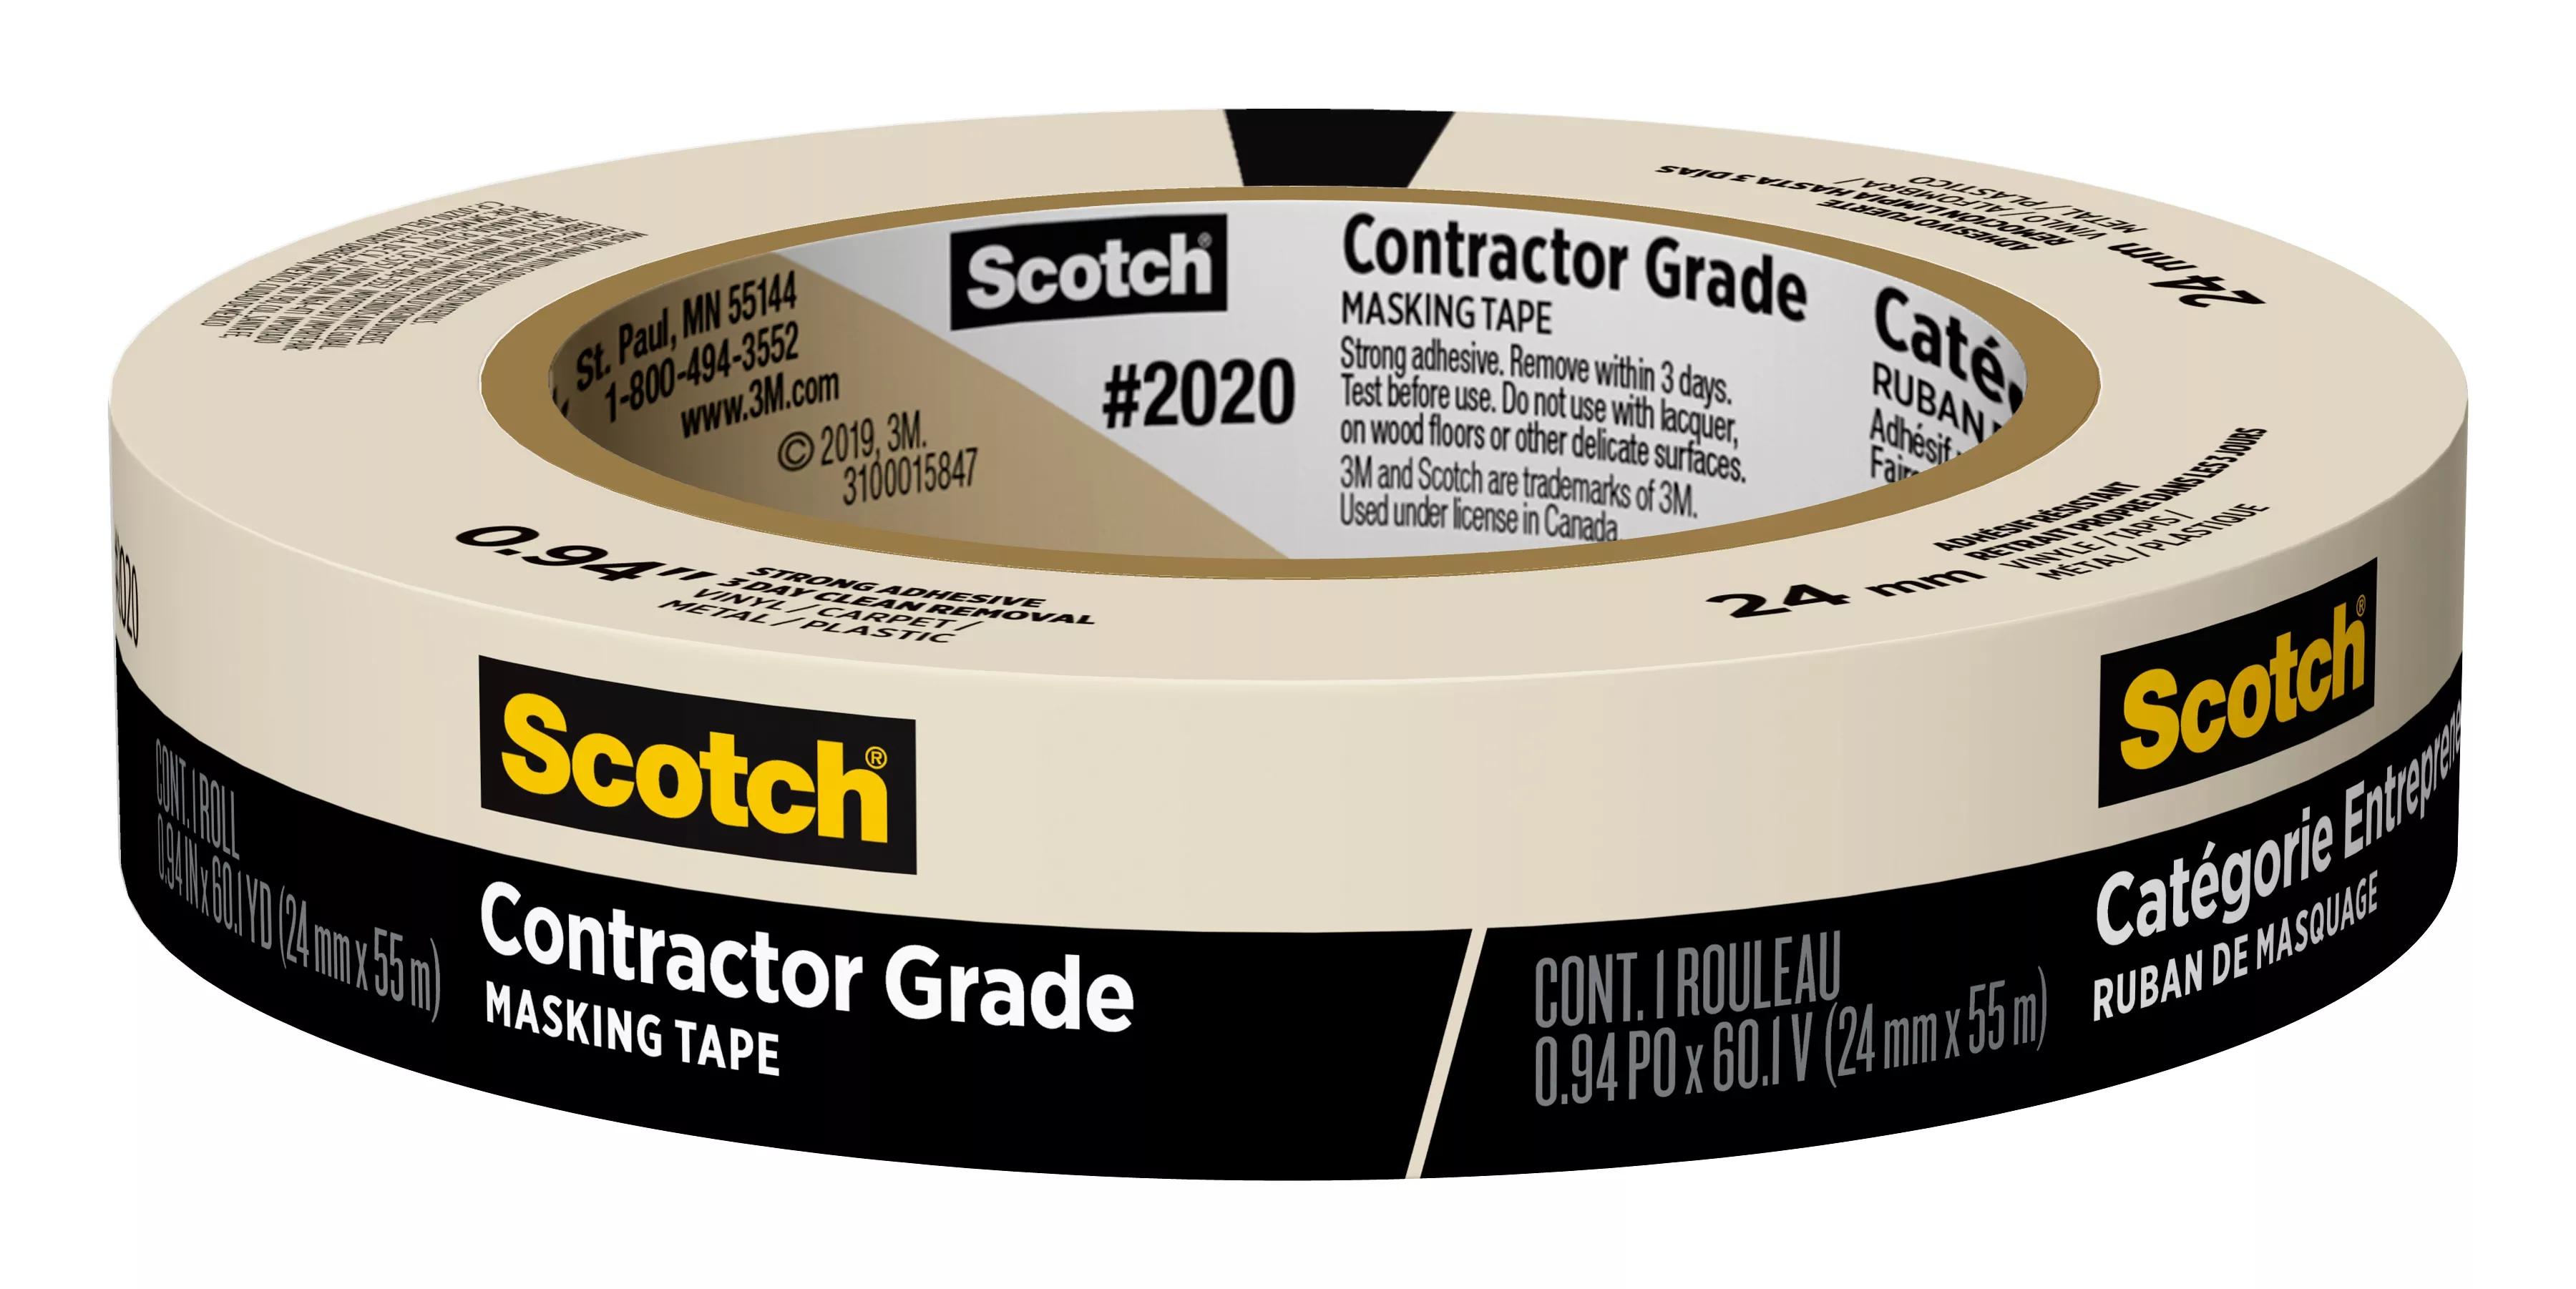 Scotch® Contractor Grade Masking Tape 2020-24AP, 0.94 in x 60.1 yd (24mm
x 55m)